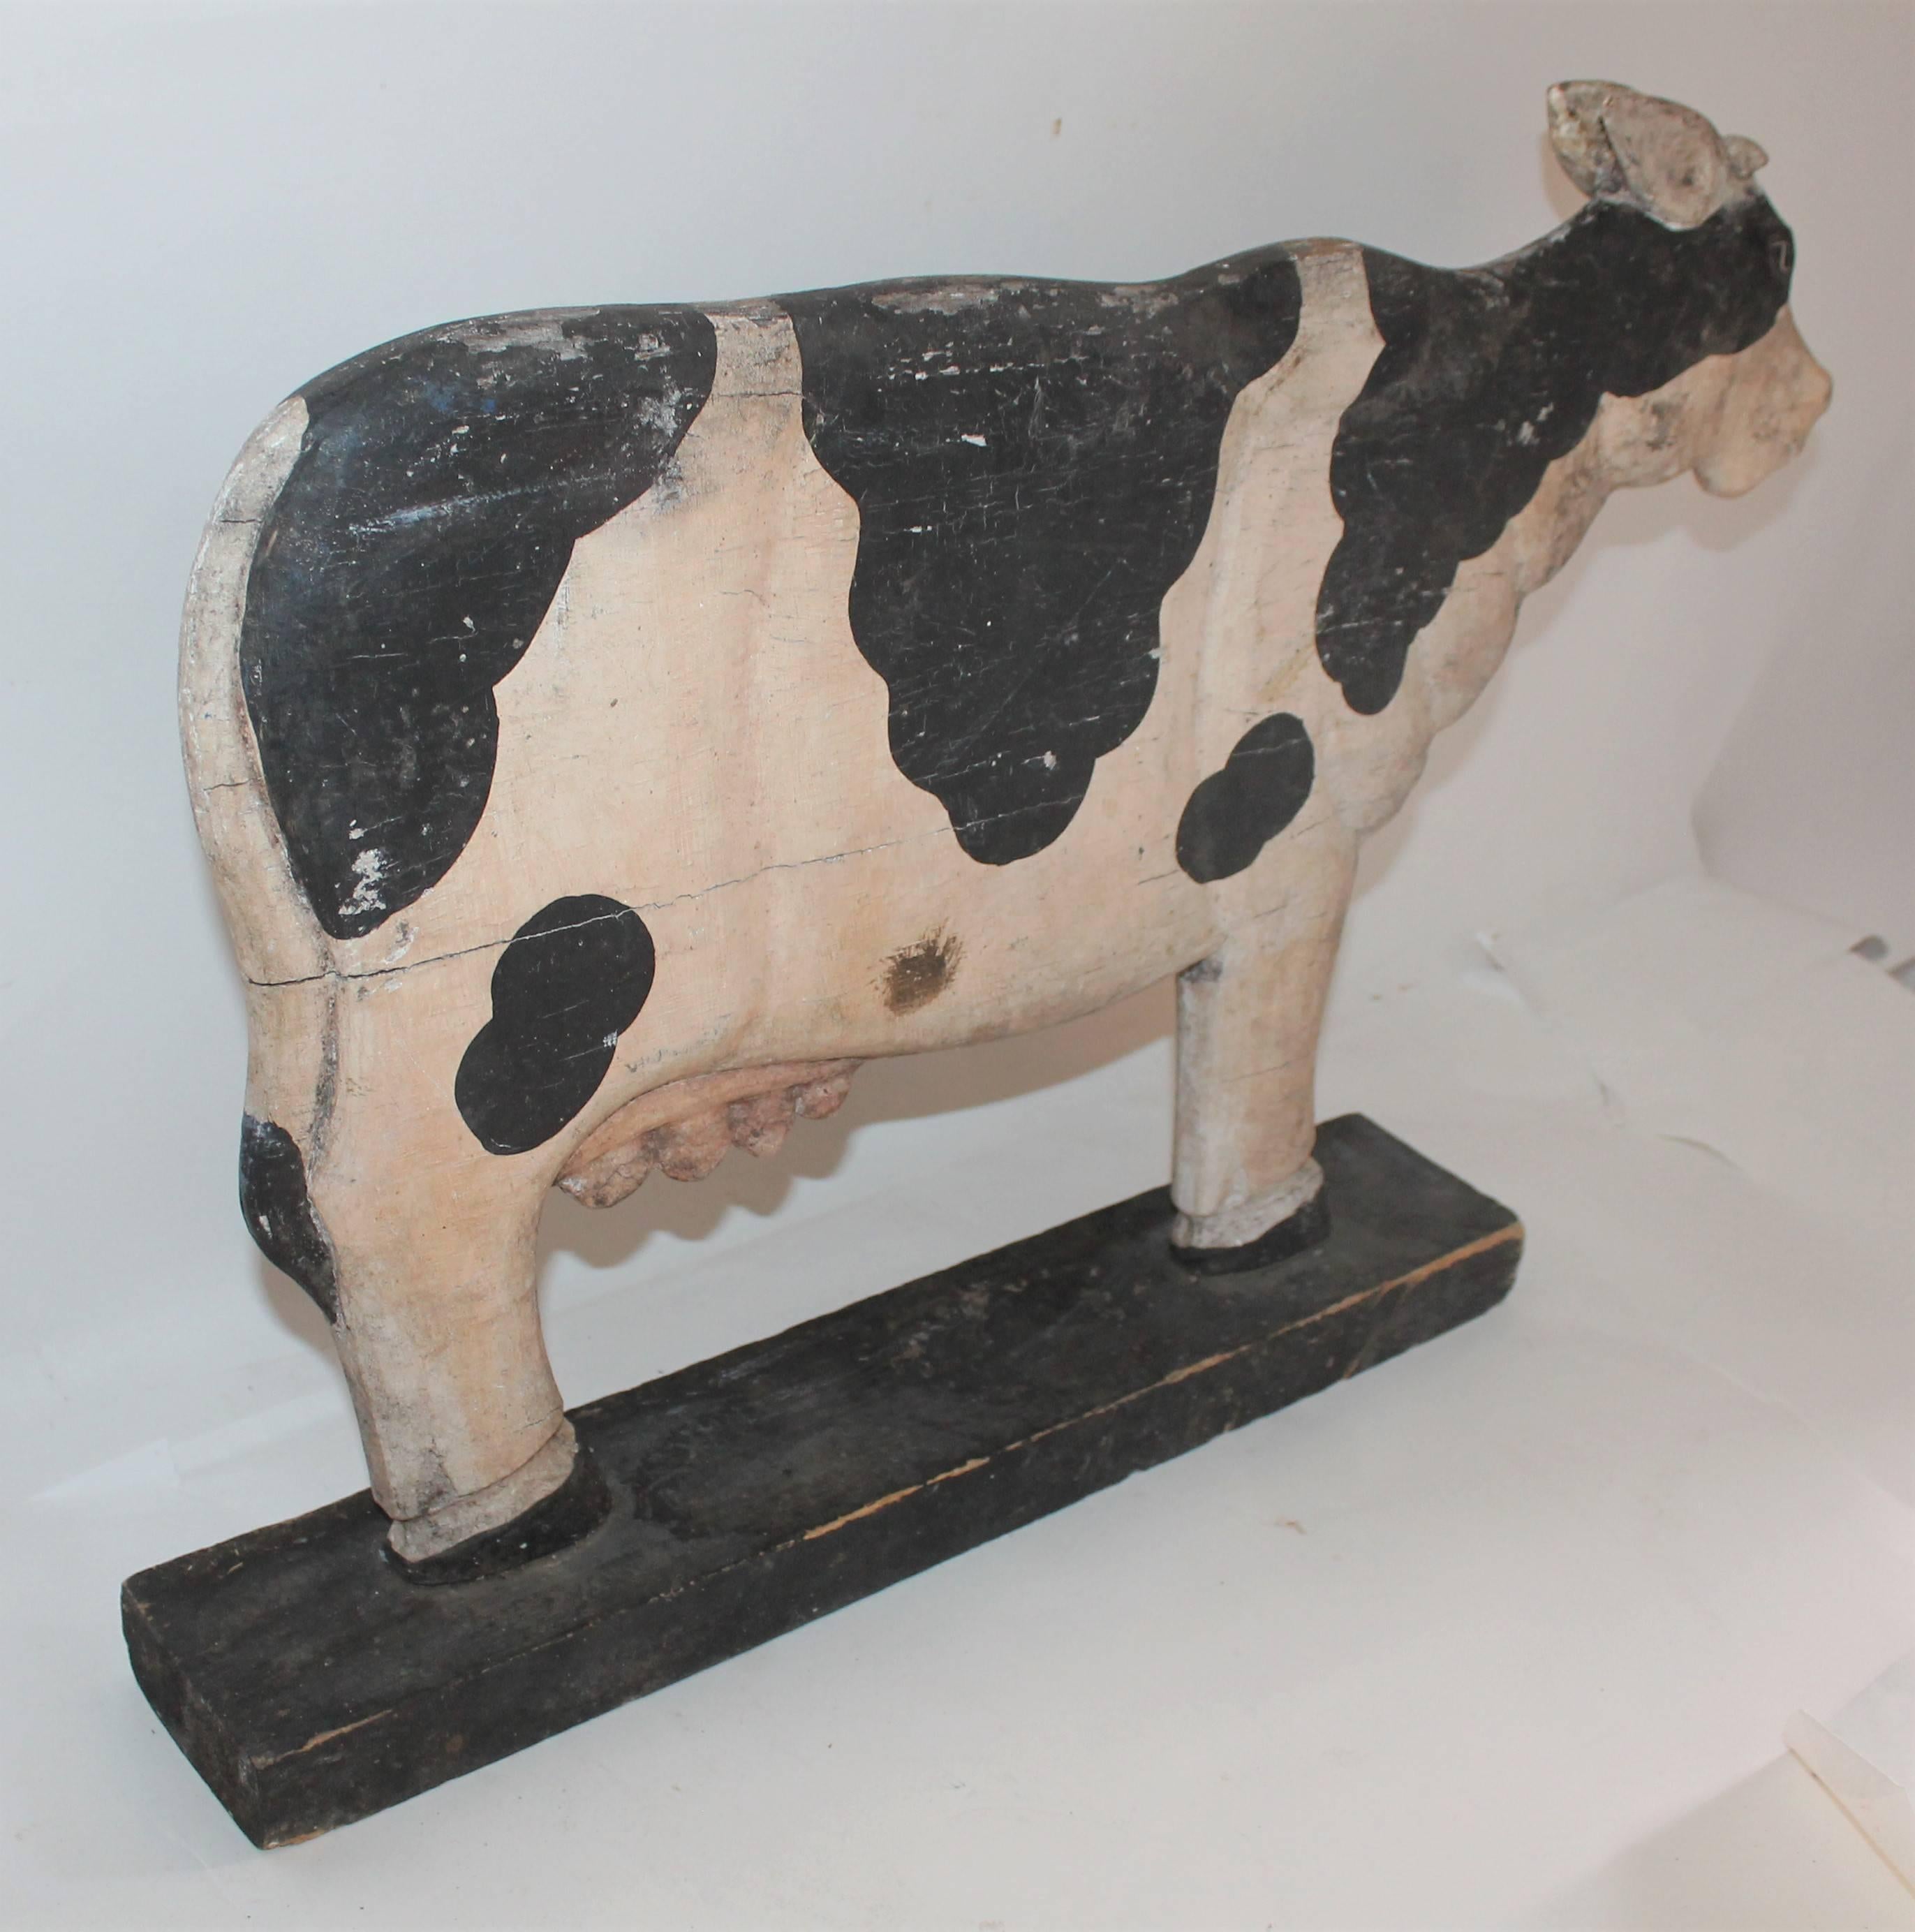 This hand-carved and painted folky standing cow trade sign was probably used on a counter or window in a dairy farm. The black base is original to the Folk Art carved cow. There is paint loss and wear consistent from age and use and likely it was